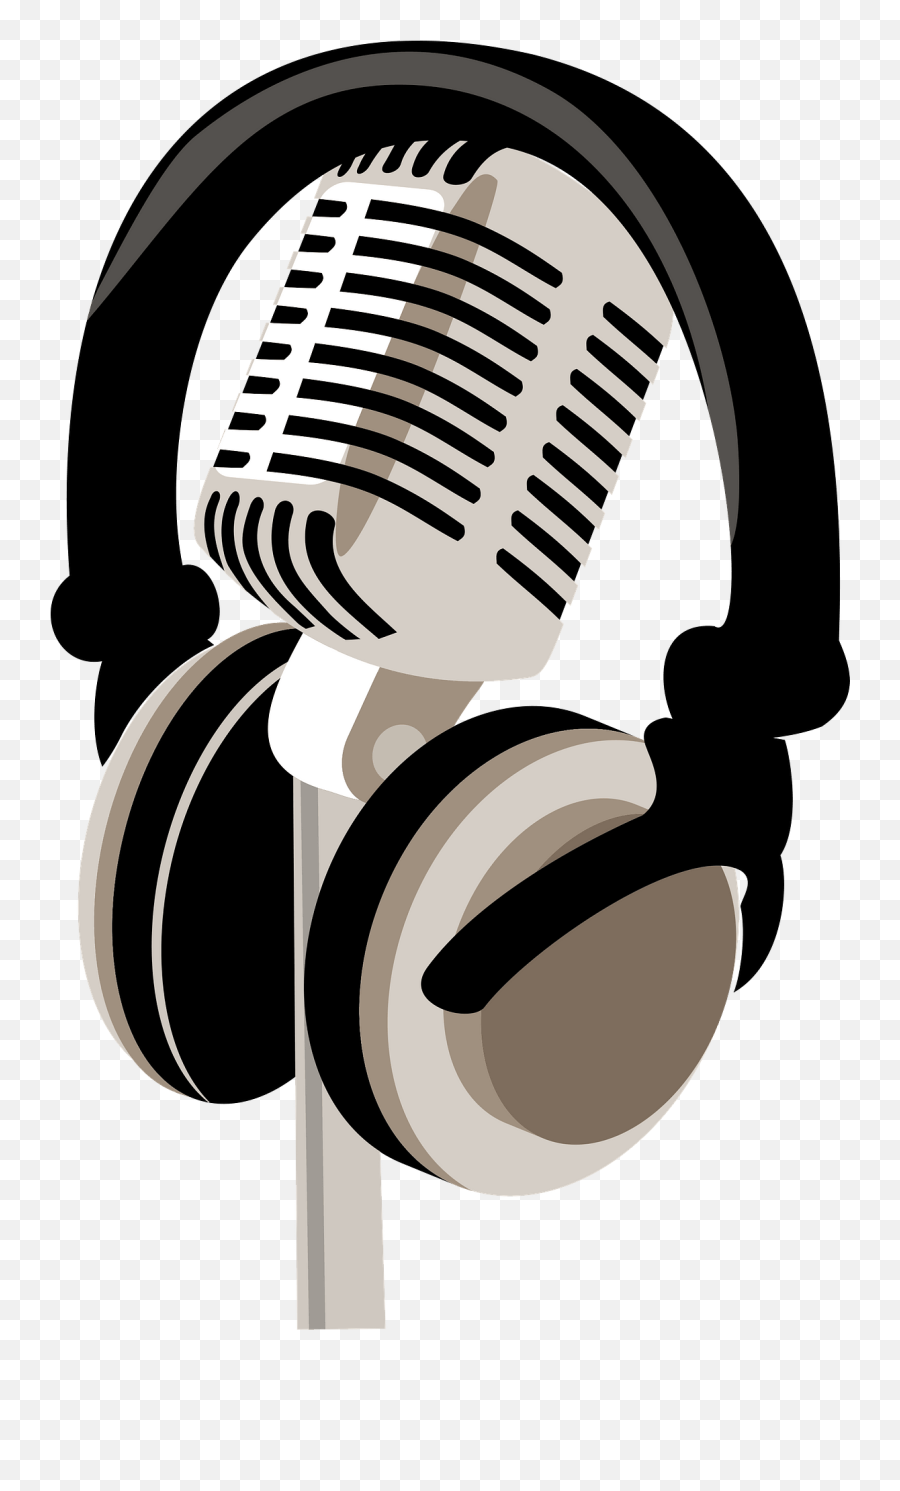 Old Fashioned Microphone And Headphones - Microphone And Headphone Clipart Emoji,Emoji Wearing Headphones